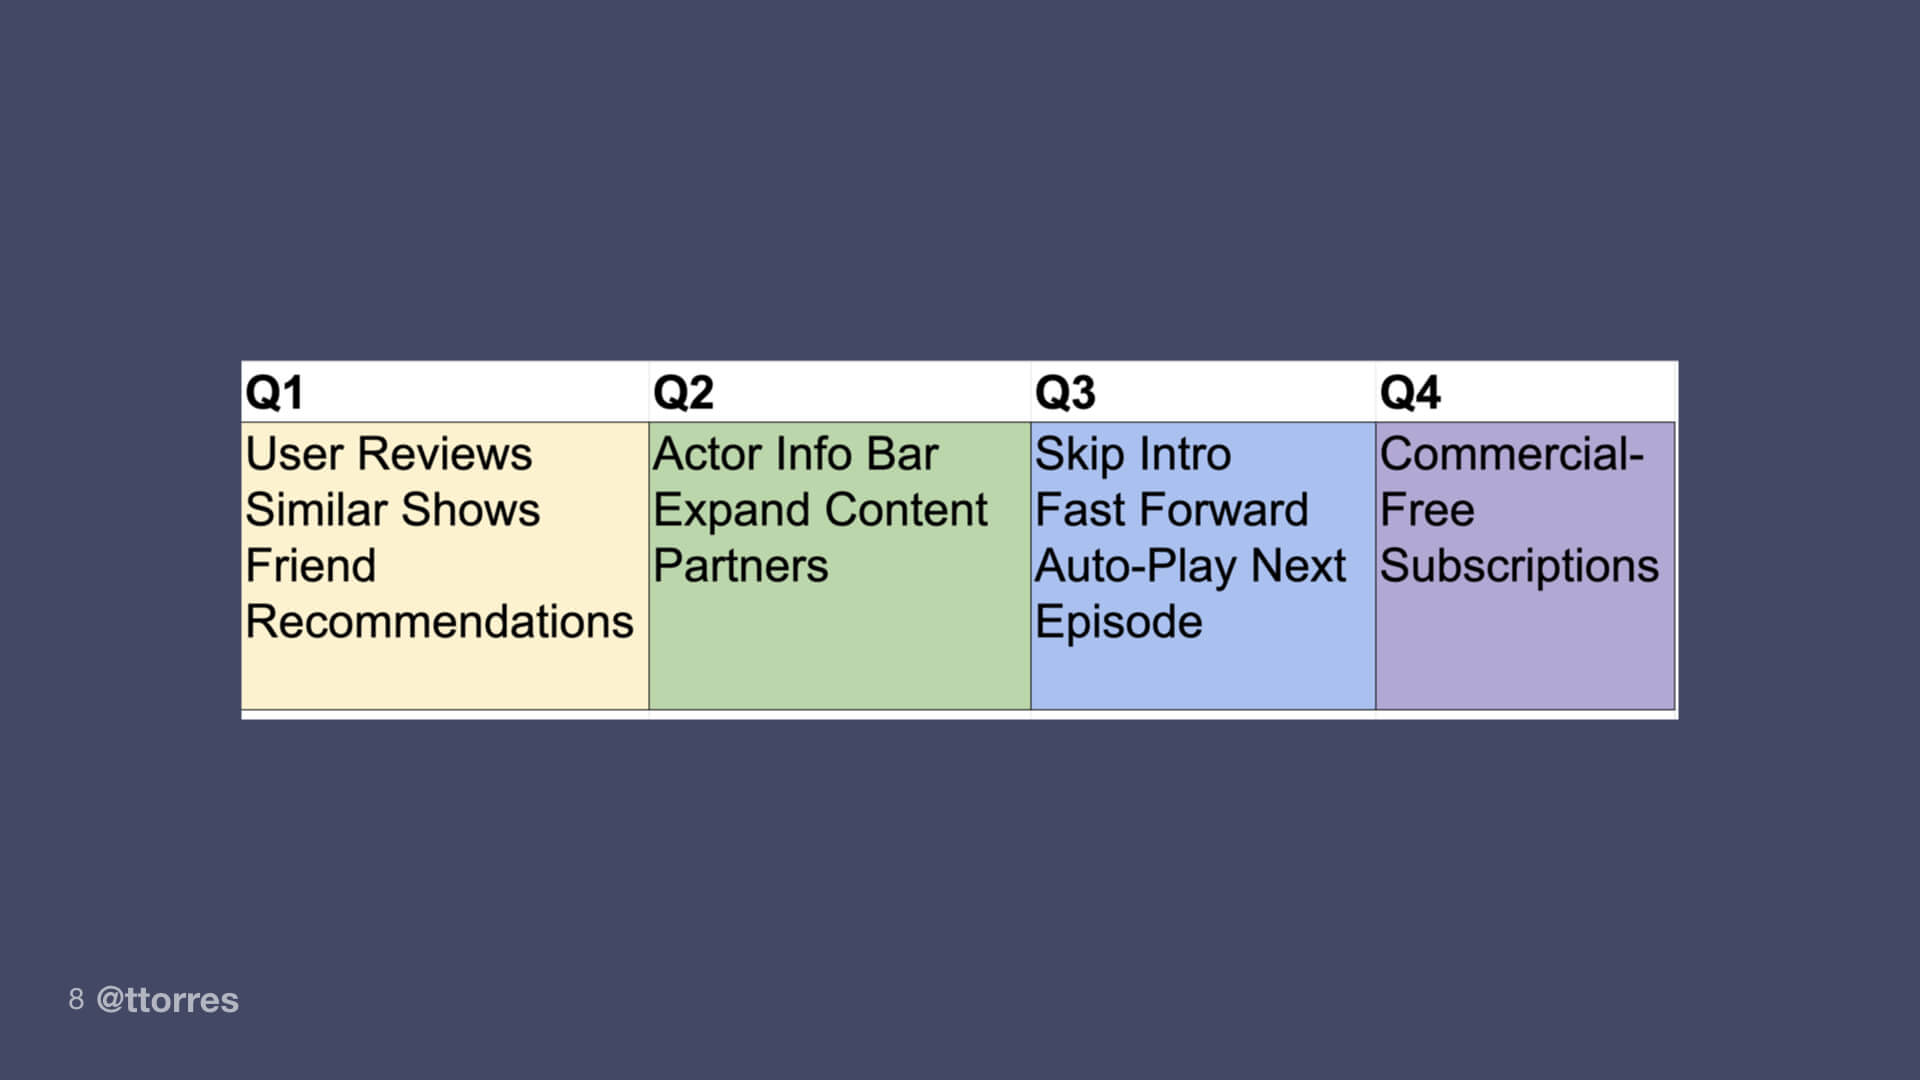 A table that shows Q1, Q2, Q3, and Q4 with product features to launch in each quarter.